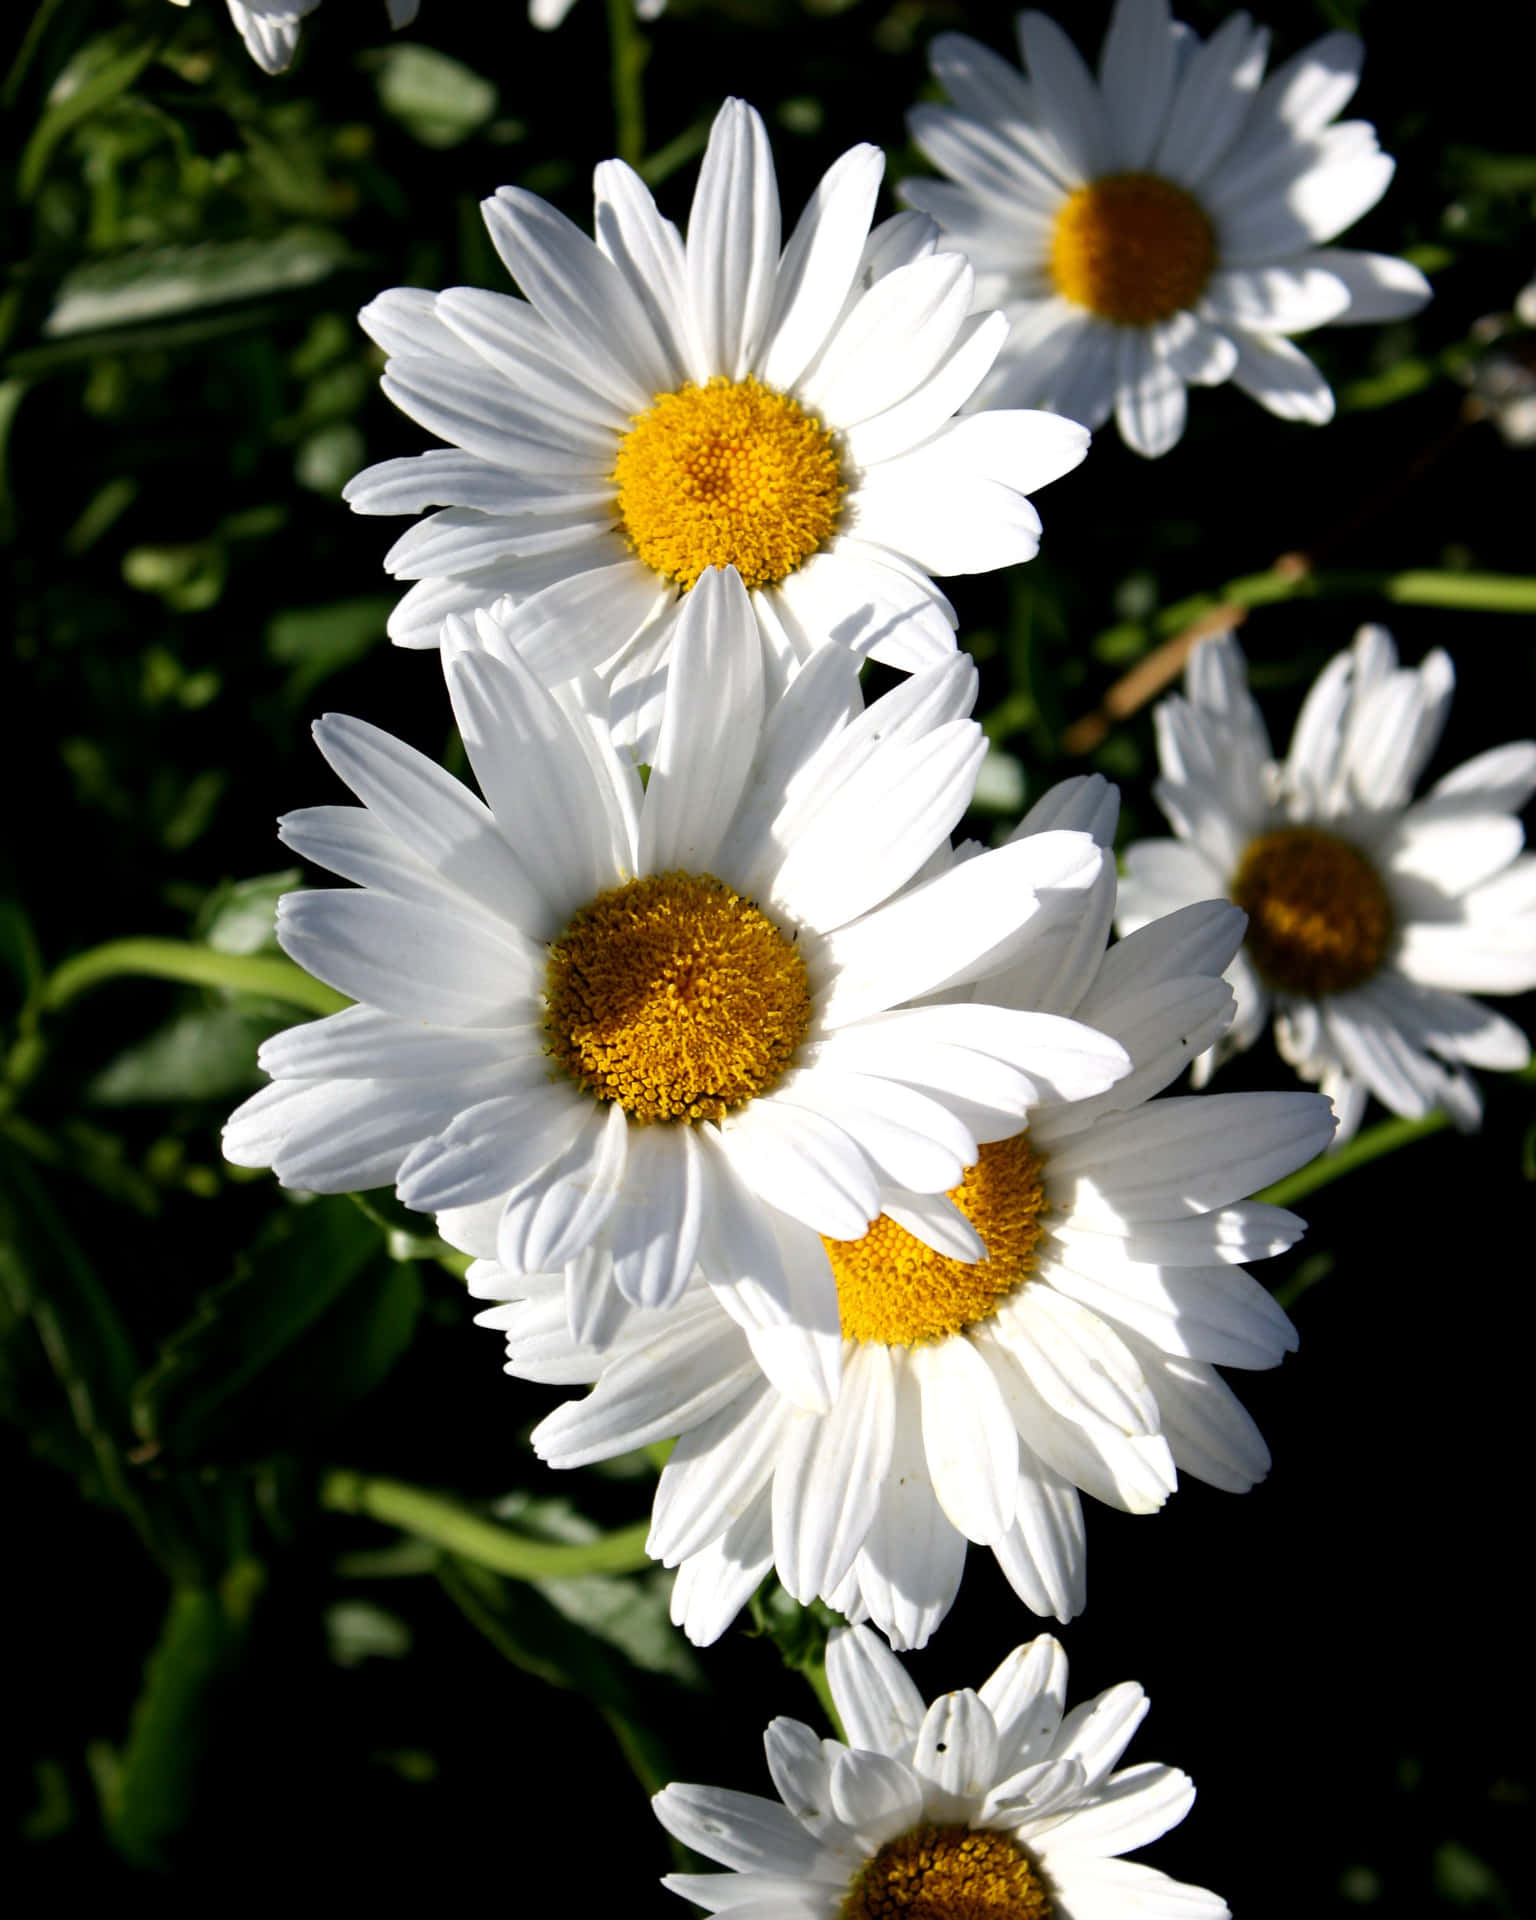 Daisy, a symbol of beauty, freshness and youth